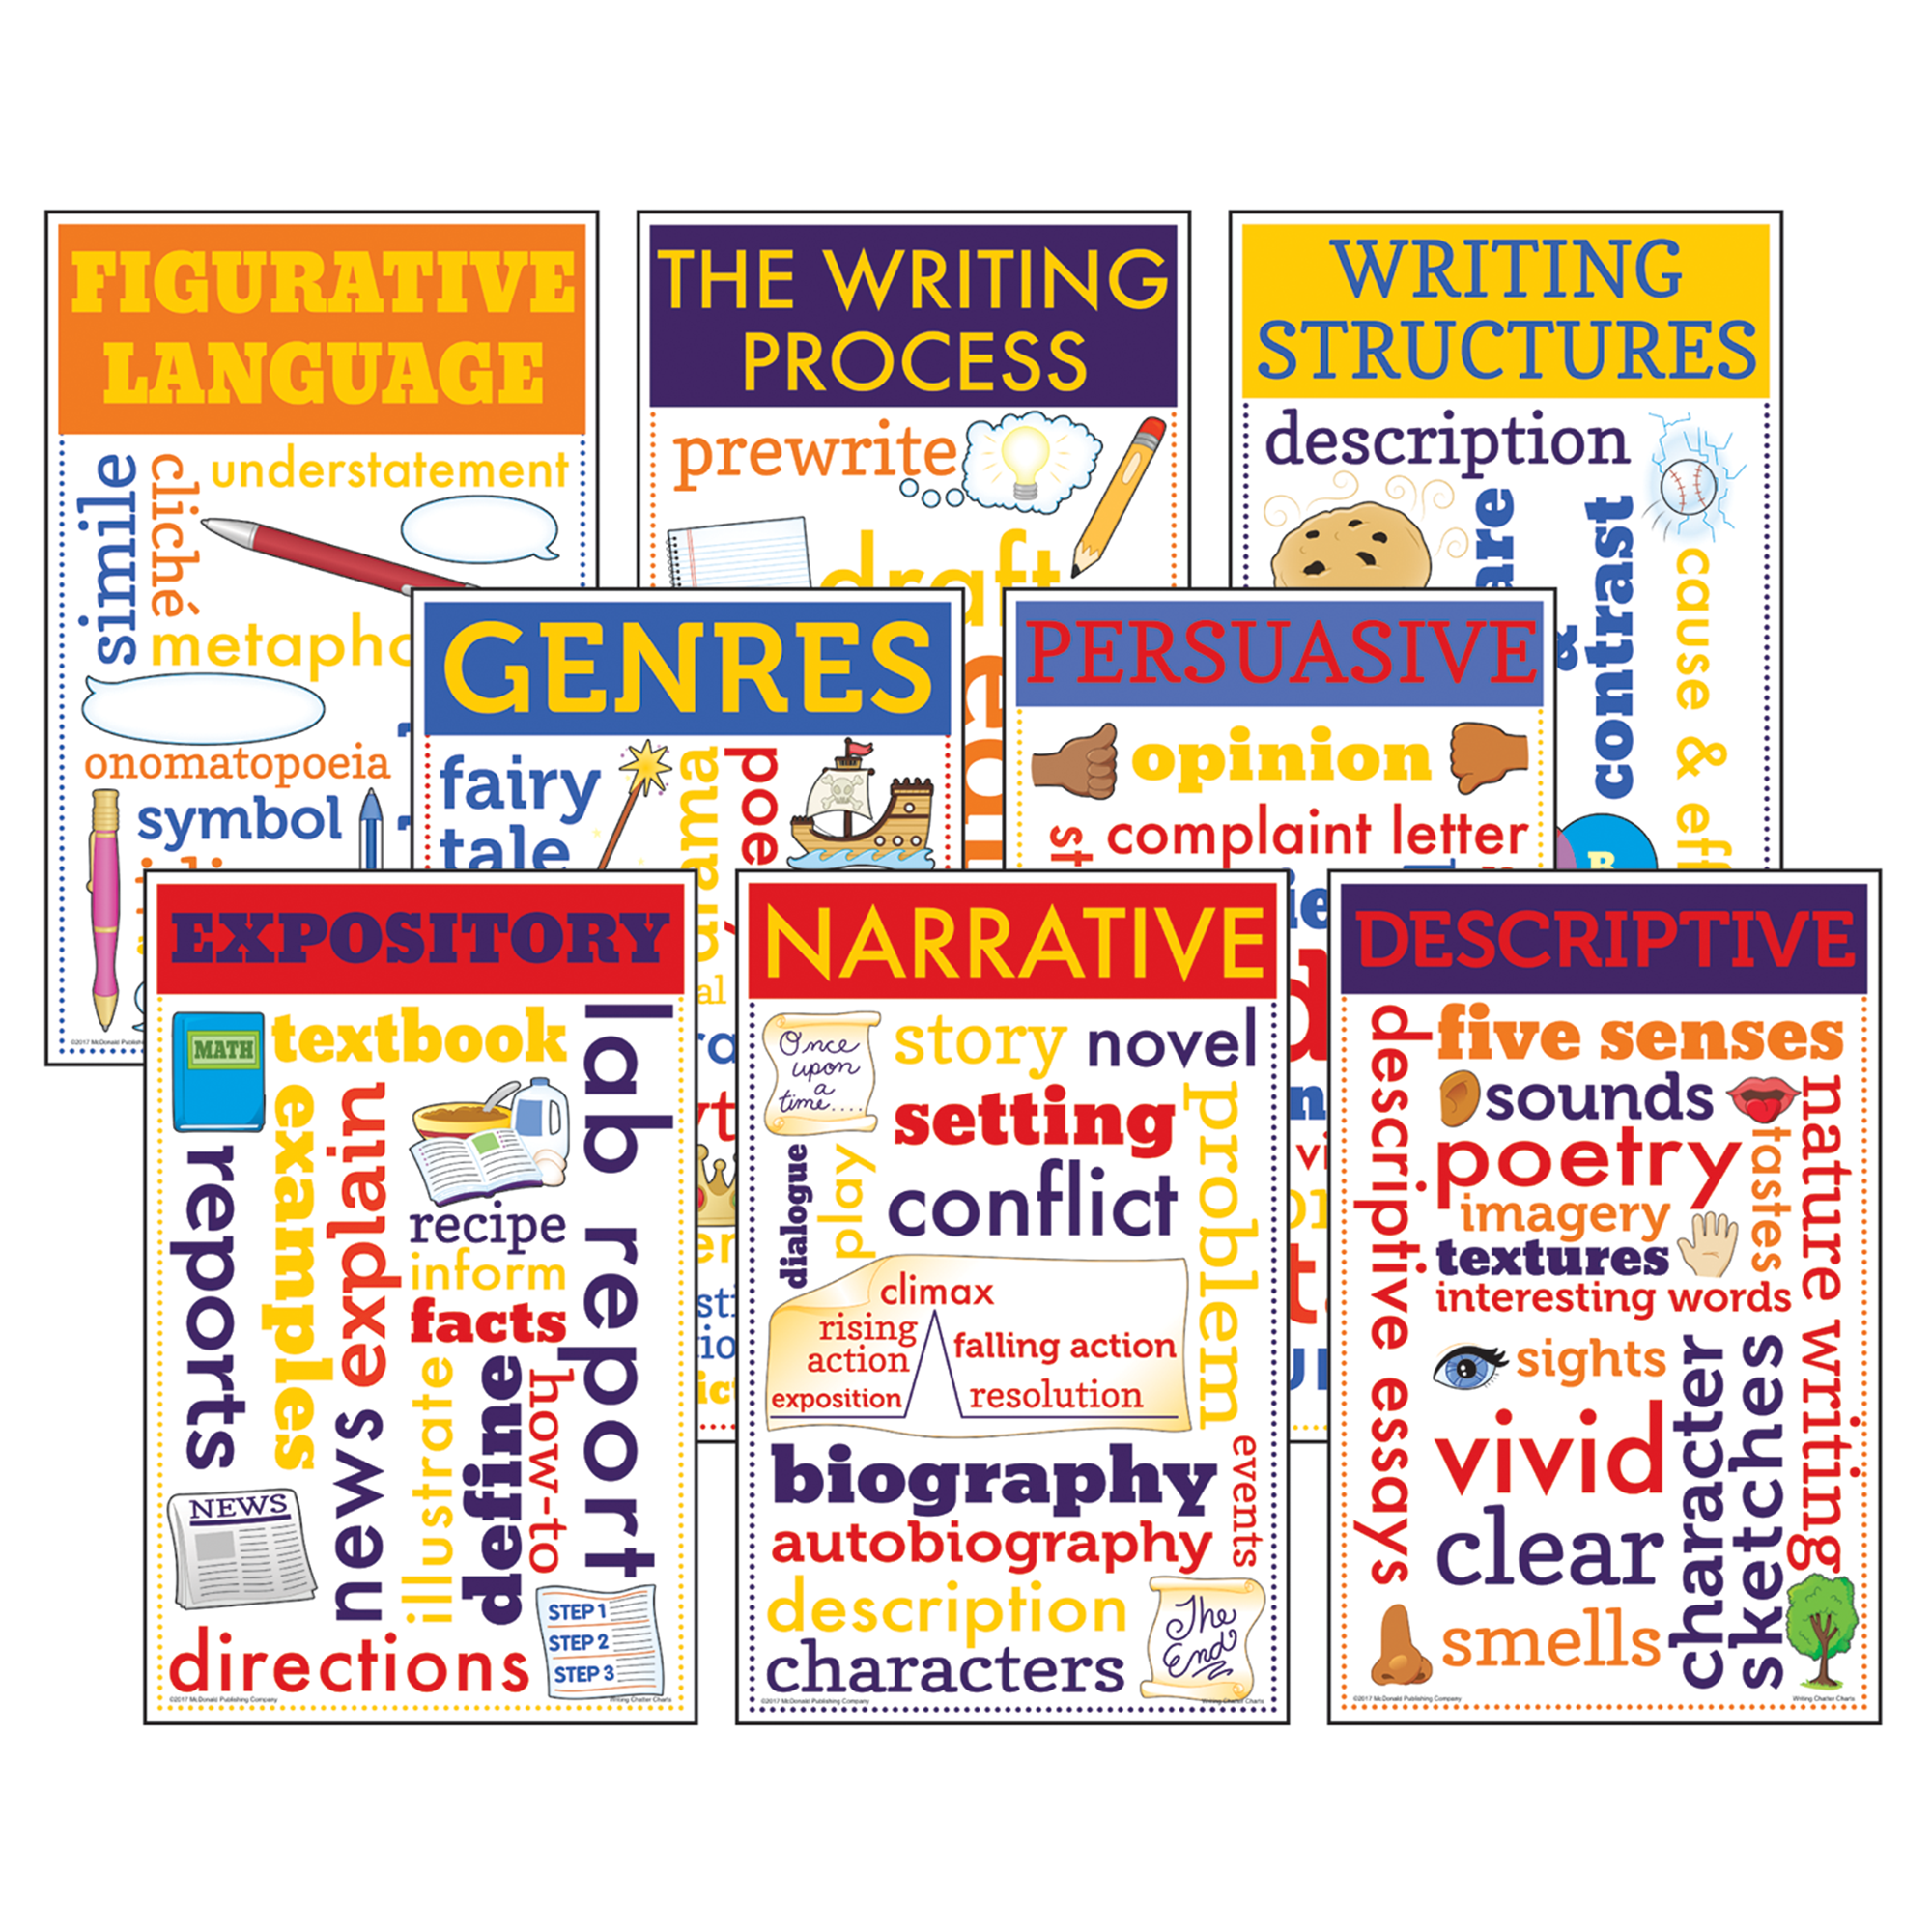 These eight 11" x 17" posters show key terms and colorful images related to these important topics: narrative writing, persuasive writing, expository writing, descriptive writing, genres, writing structures, figurative language, and the writing process.